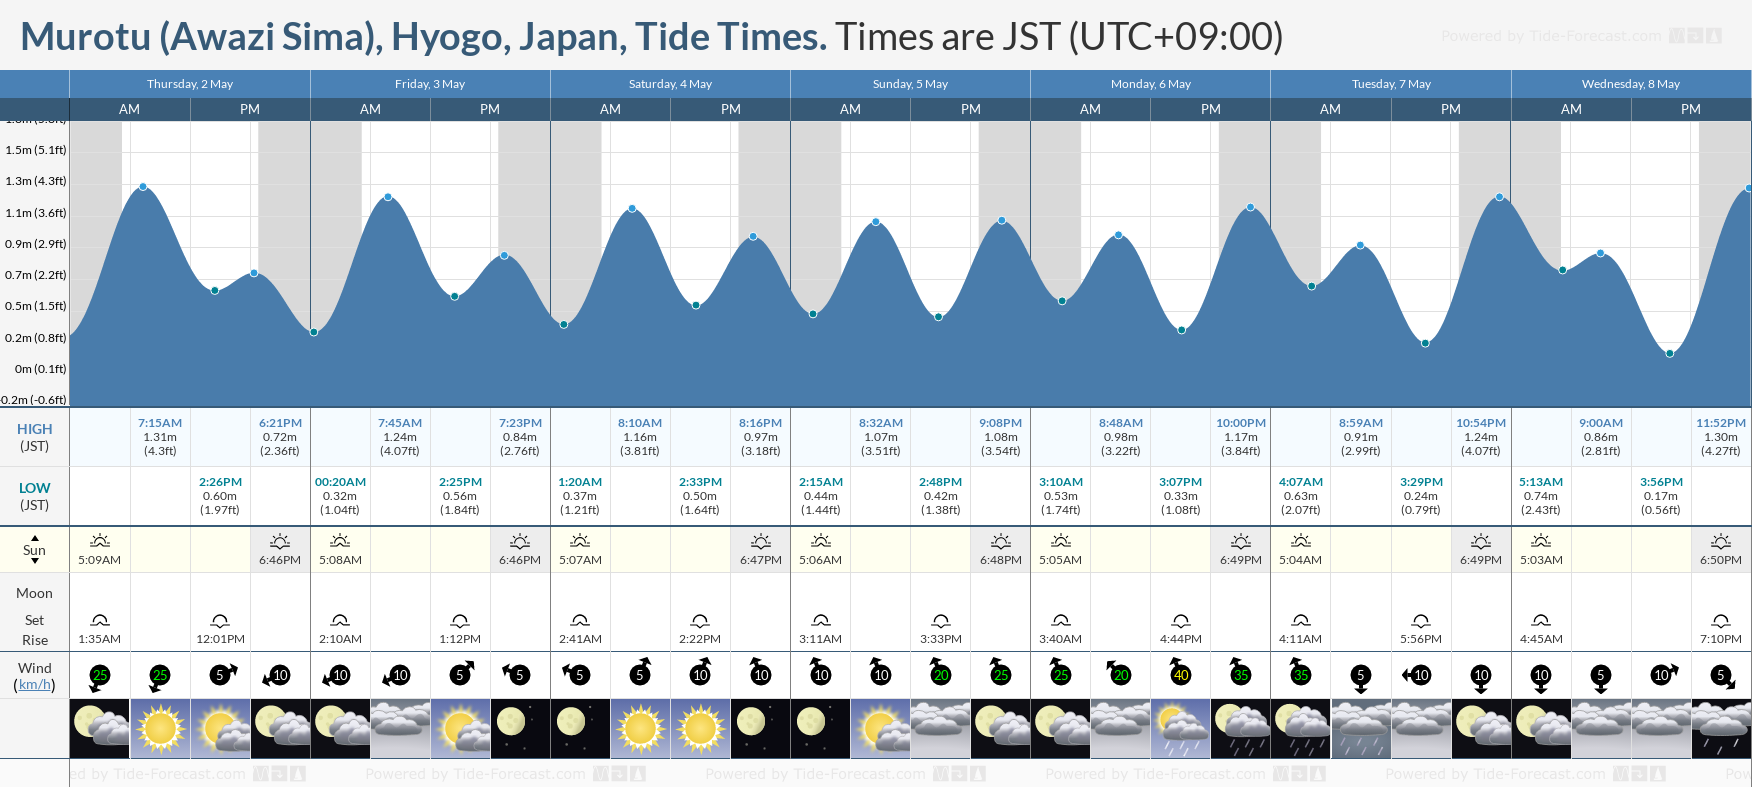 Murotu (Awazi Sima), Hyogo, Japan Tide Chart including high and low tide tide times for the next 7 days